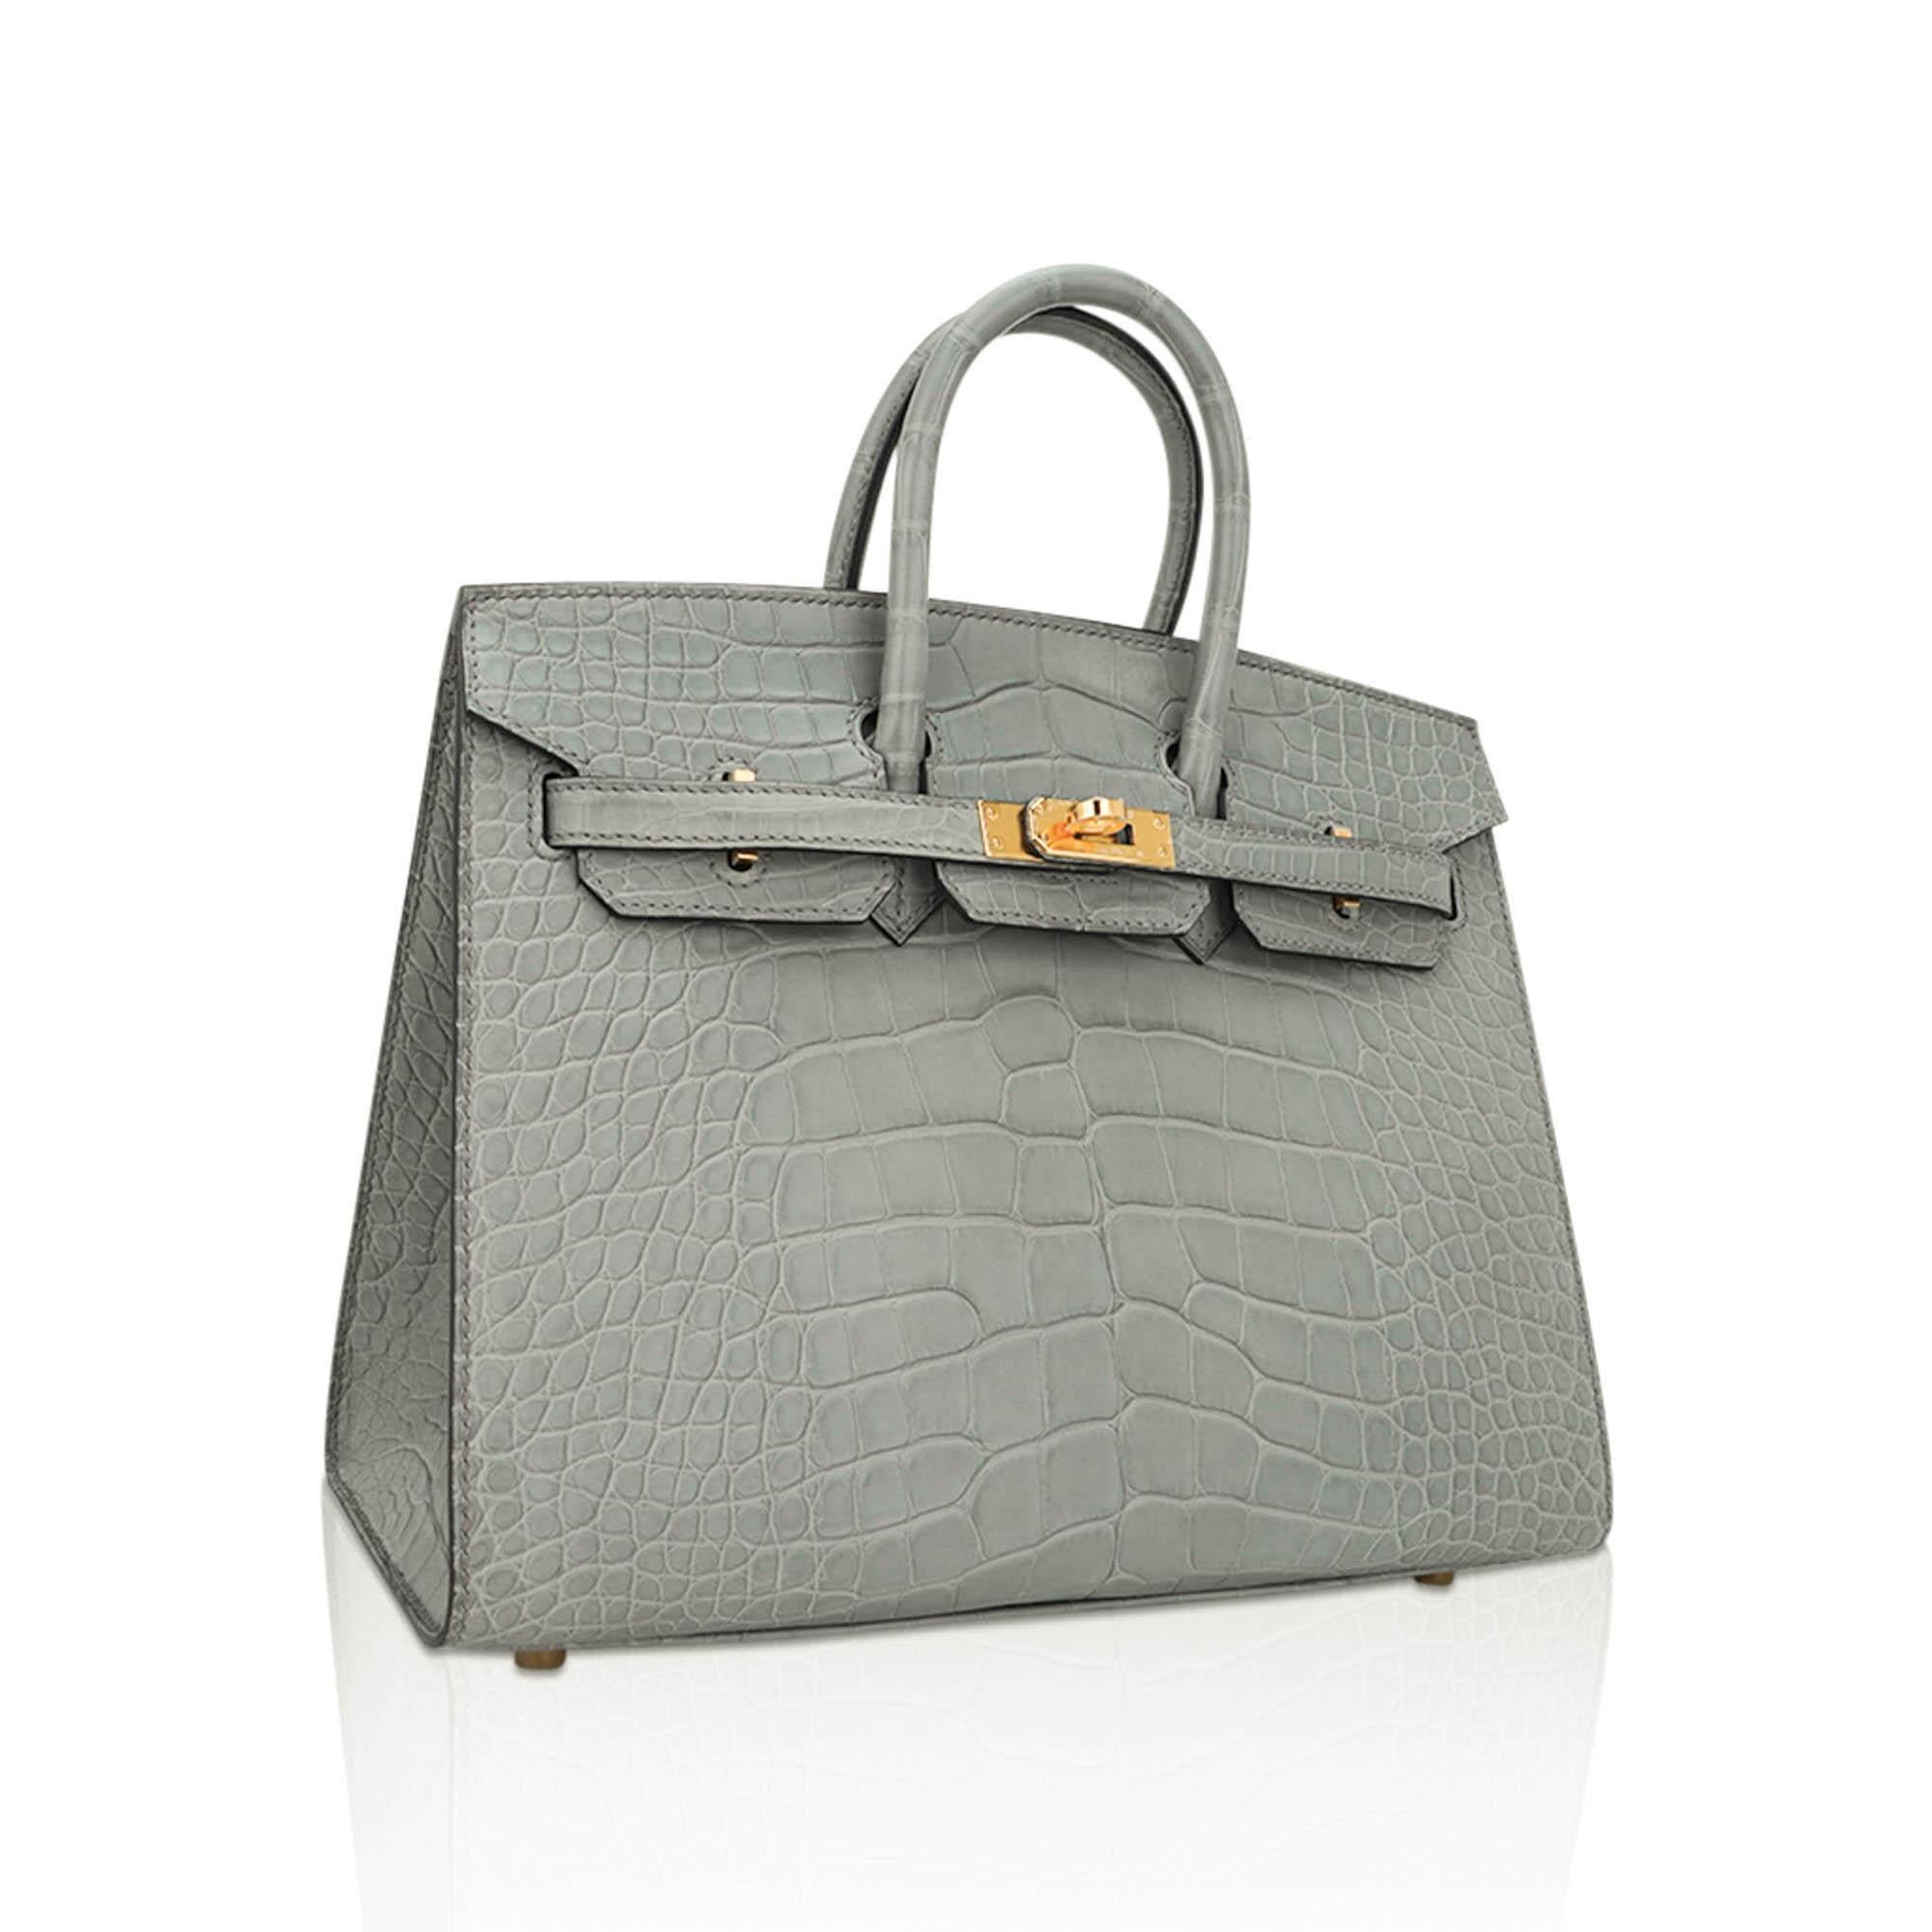 Mightychic offers an Hermes Birkin Sellier 25 bag featured in stunning Gris Ciment.
This new gray hue from the House of Hermes is a soft concrete that is totally neutral and year round perfection.  
Perfectly complimented with Gold hardware.
This